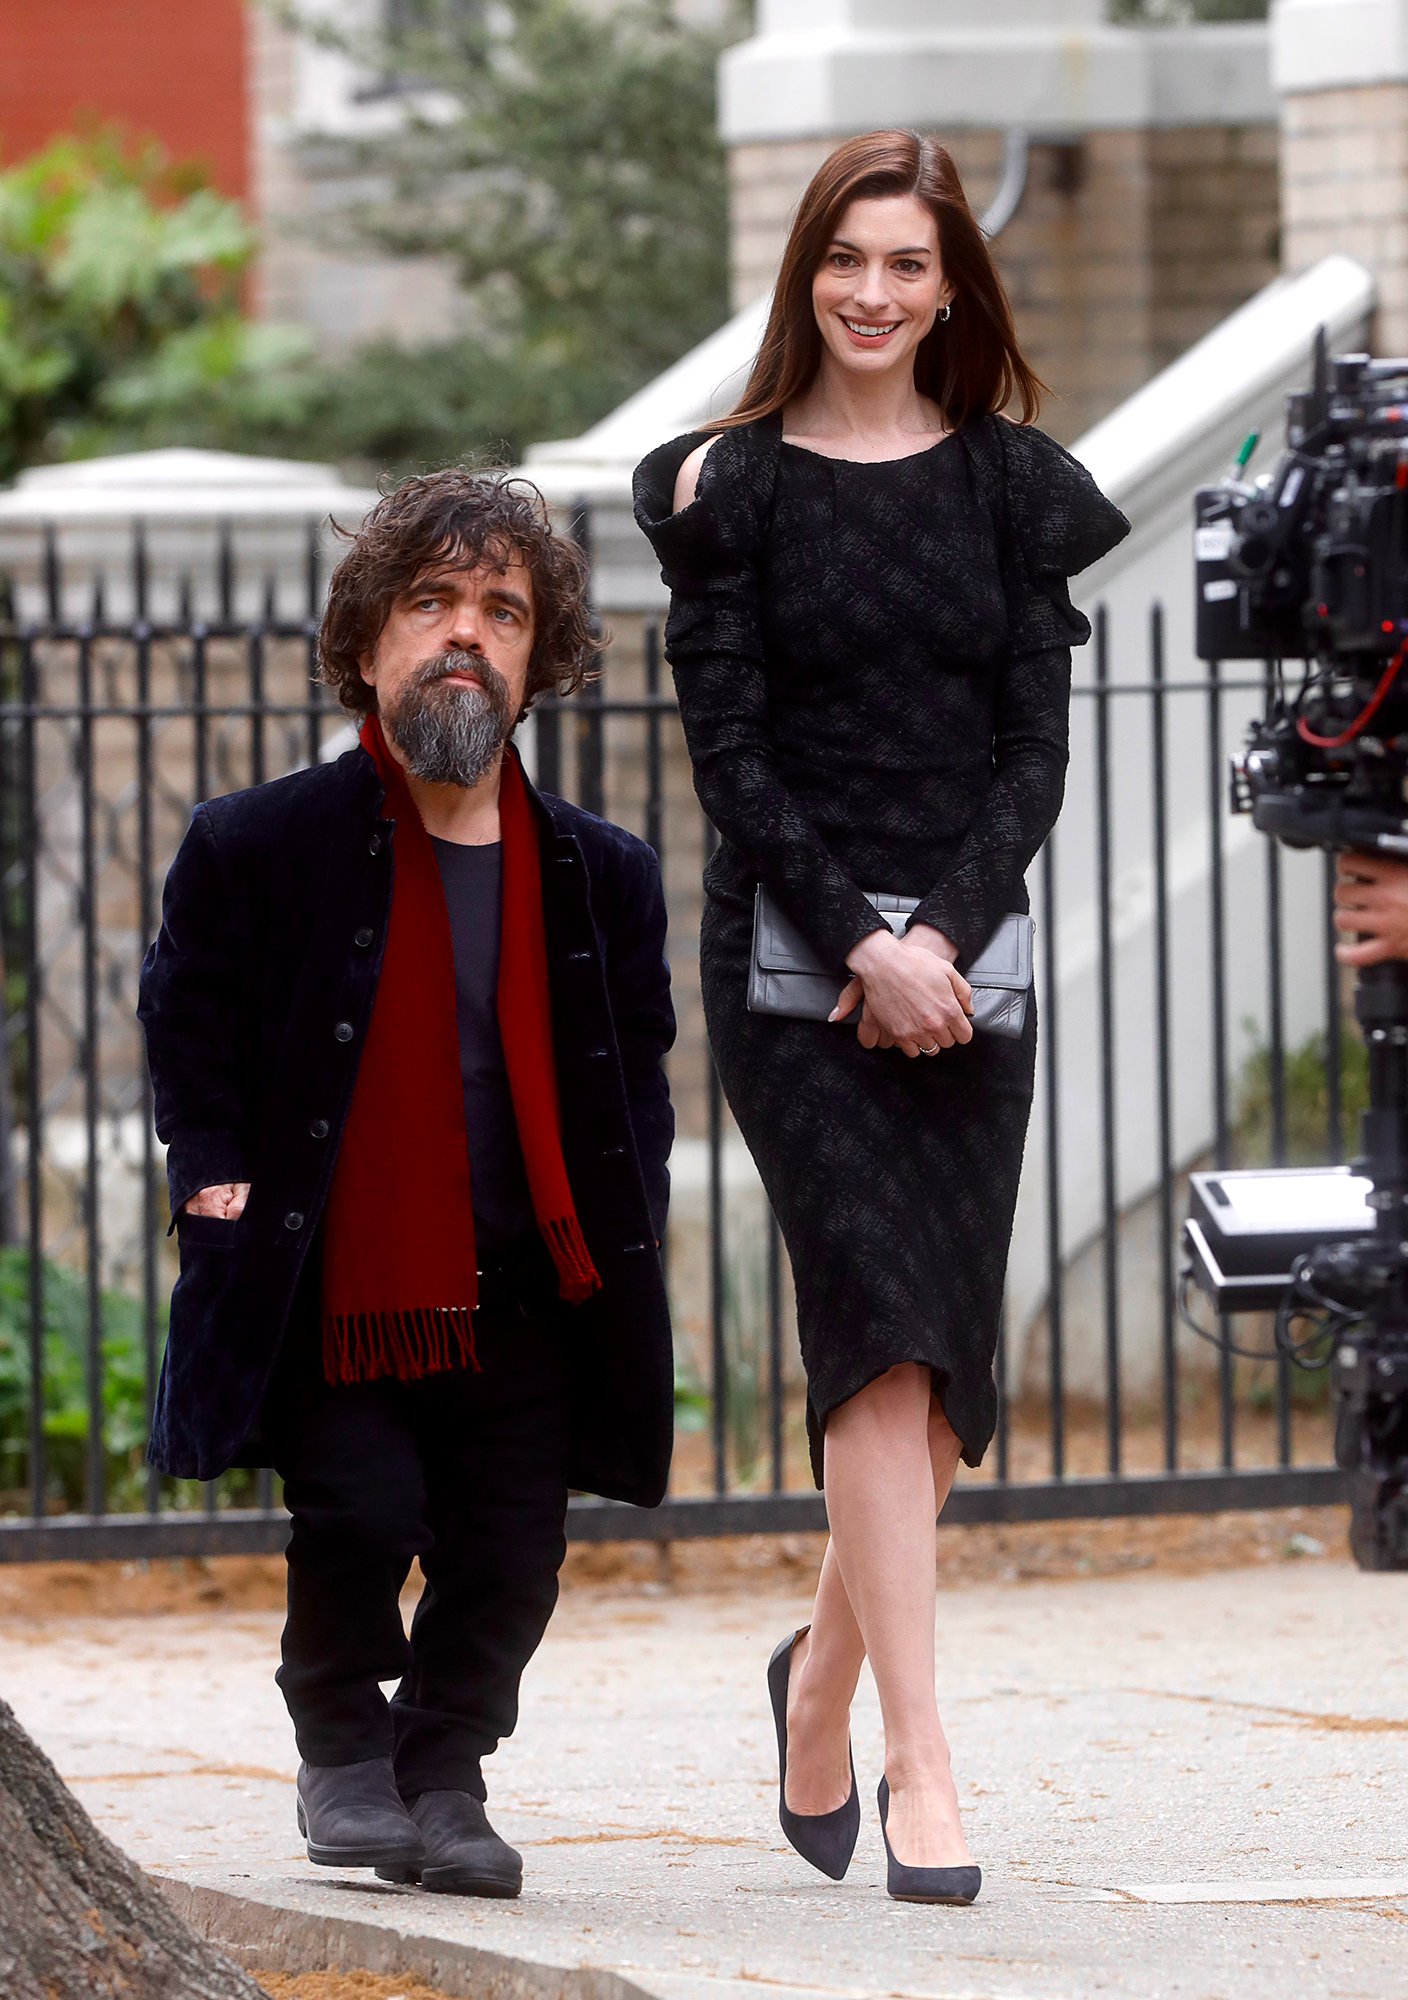 Anne Hathaway and Peter Dinklage filming “She Came To Me” in NYC